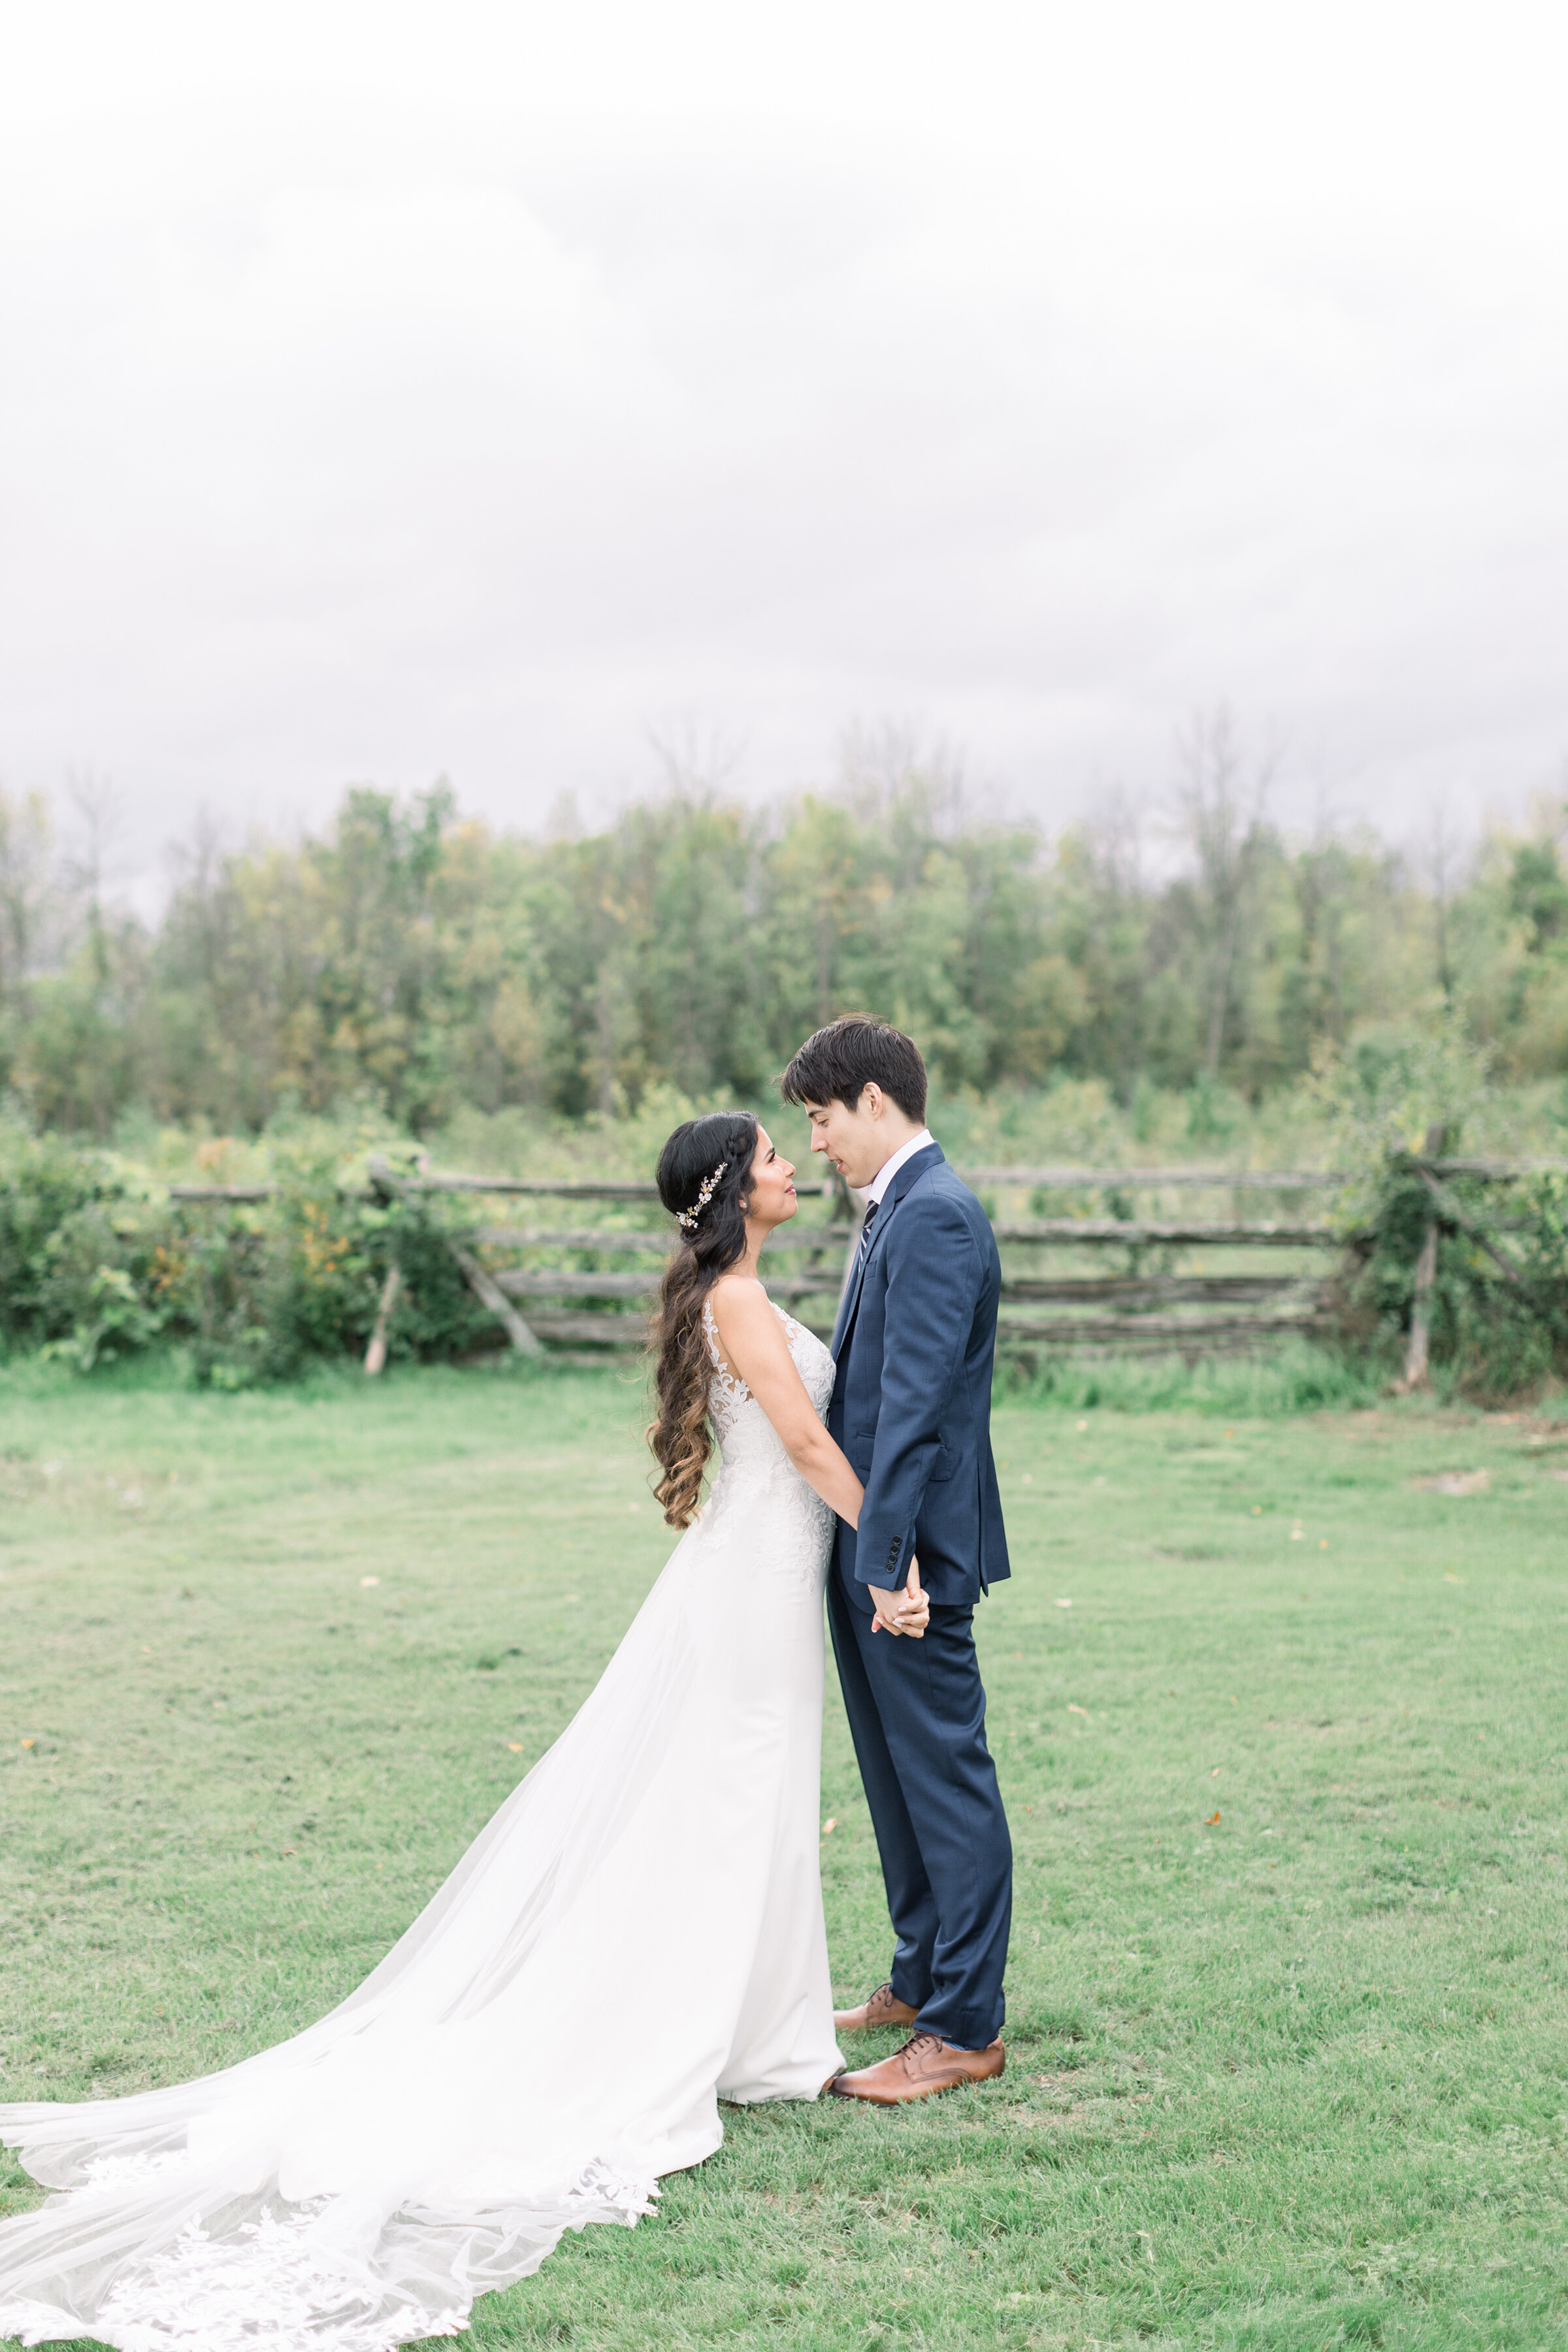  A stunning couple look into each others eyes in a dark and moody rustic wedding session in Ottawa by Chelsea Mason Photography. Stonefields Estates Carleton Place wedding location inspiration ideas and goals photo shoot location inspiration wedding 